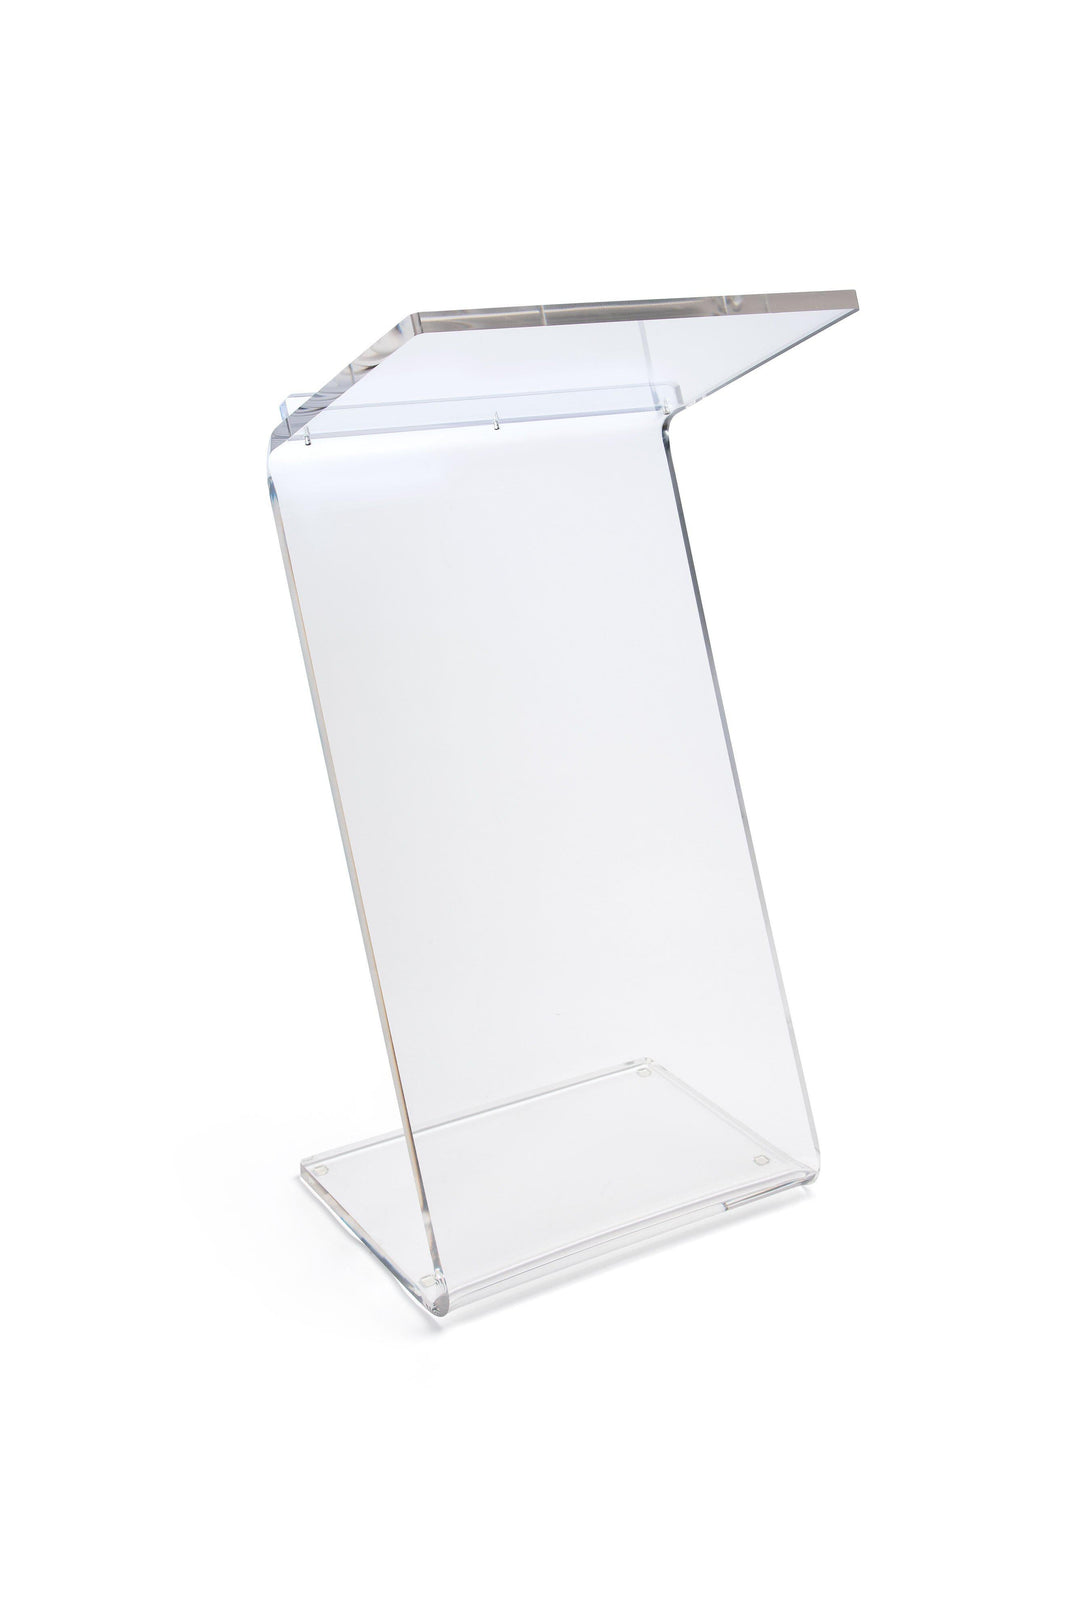 Clear Acrylic Plateau Podium-Acrylic Pulpits, Podiums and Lecterns-Podiums Direct